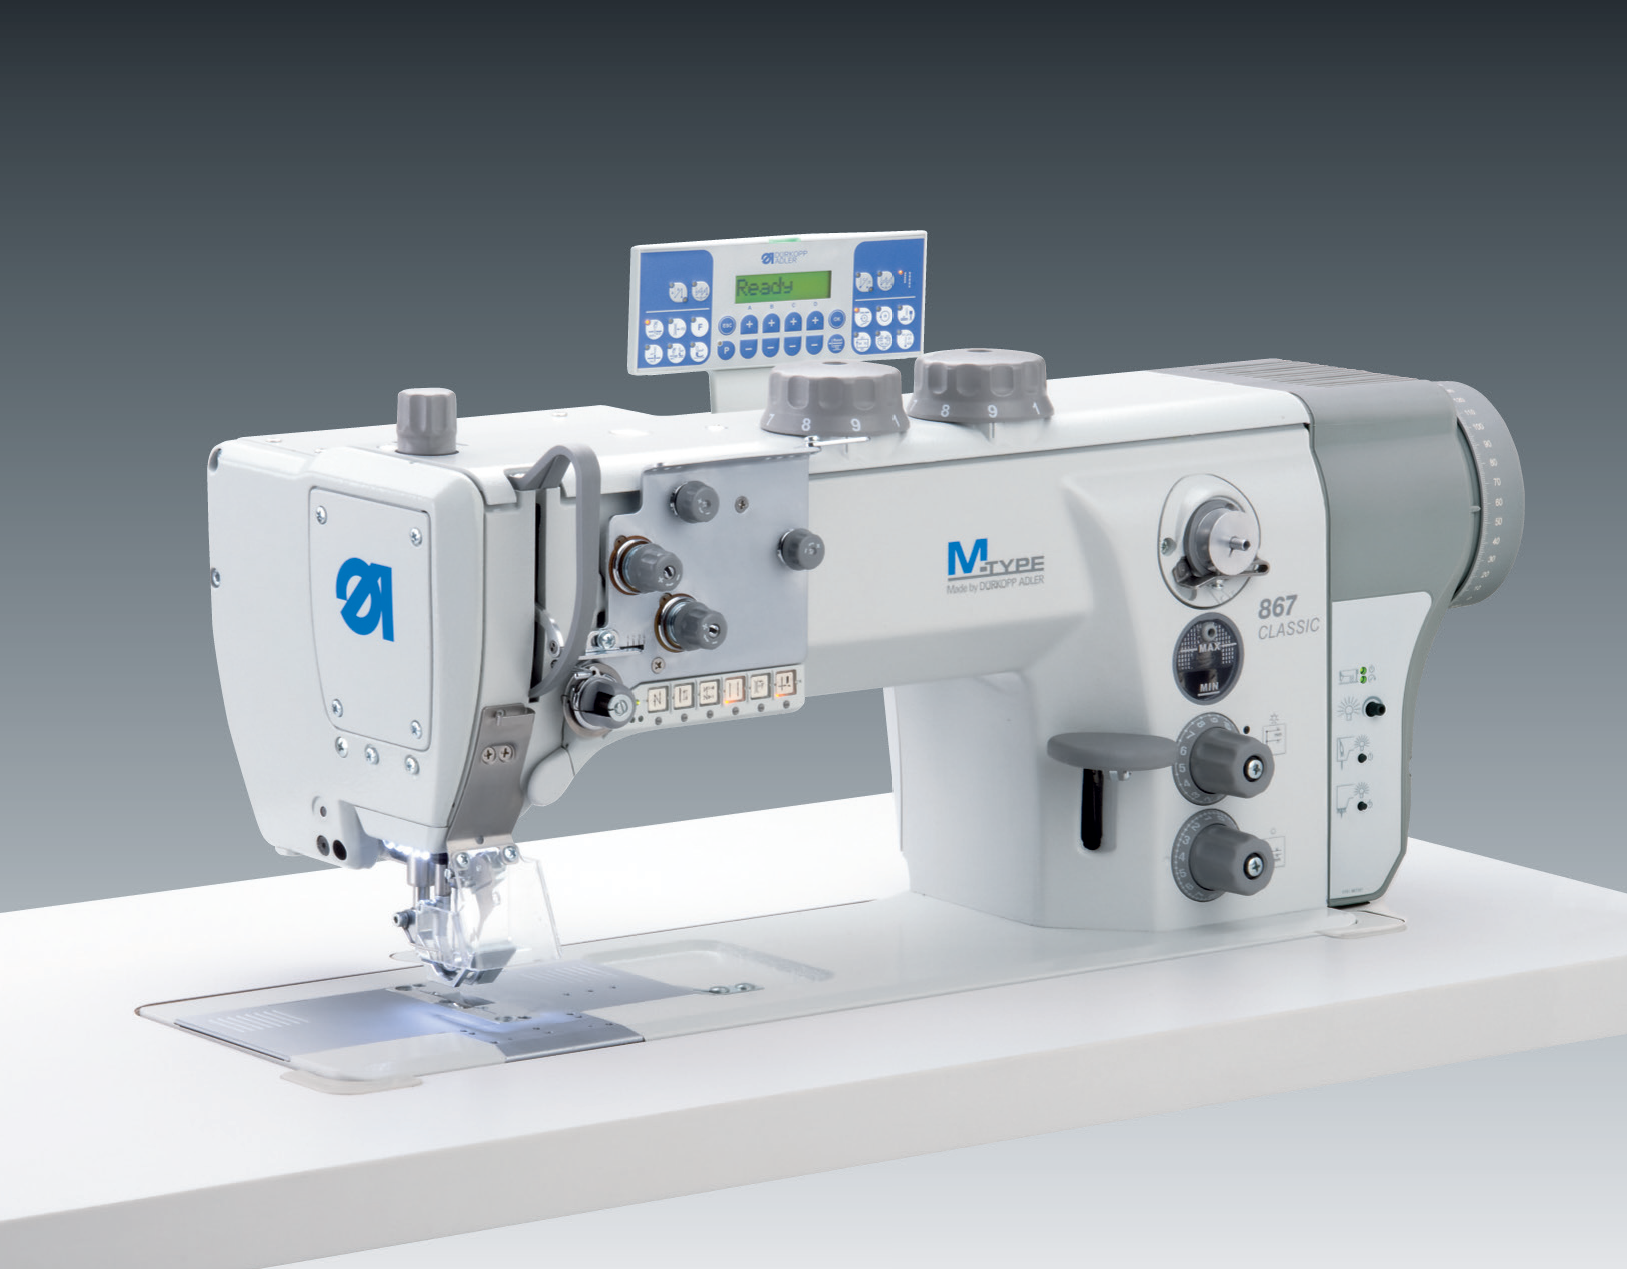 M-TYPE 867-M CLASSIC VF – the special machine for simultaneous sewing and trimming